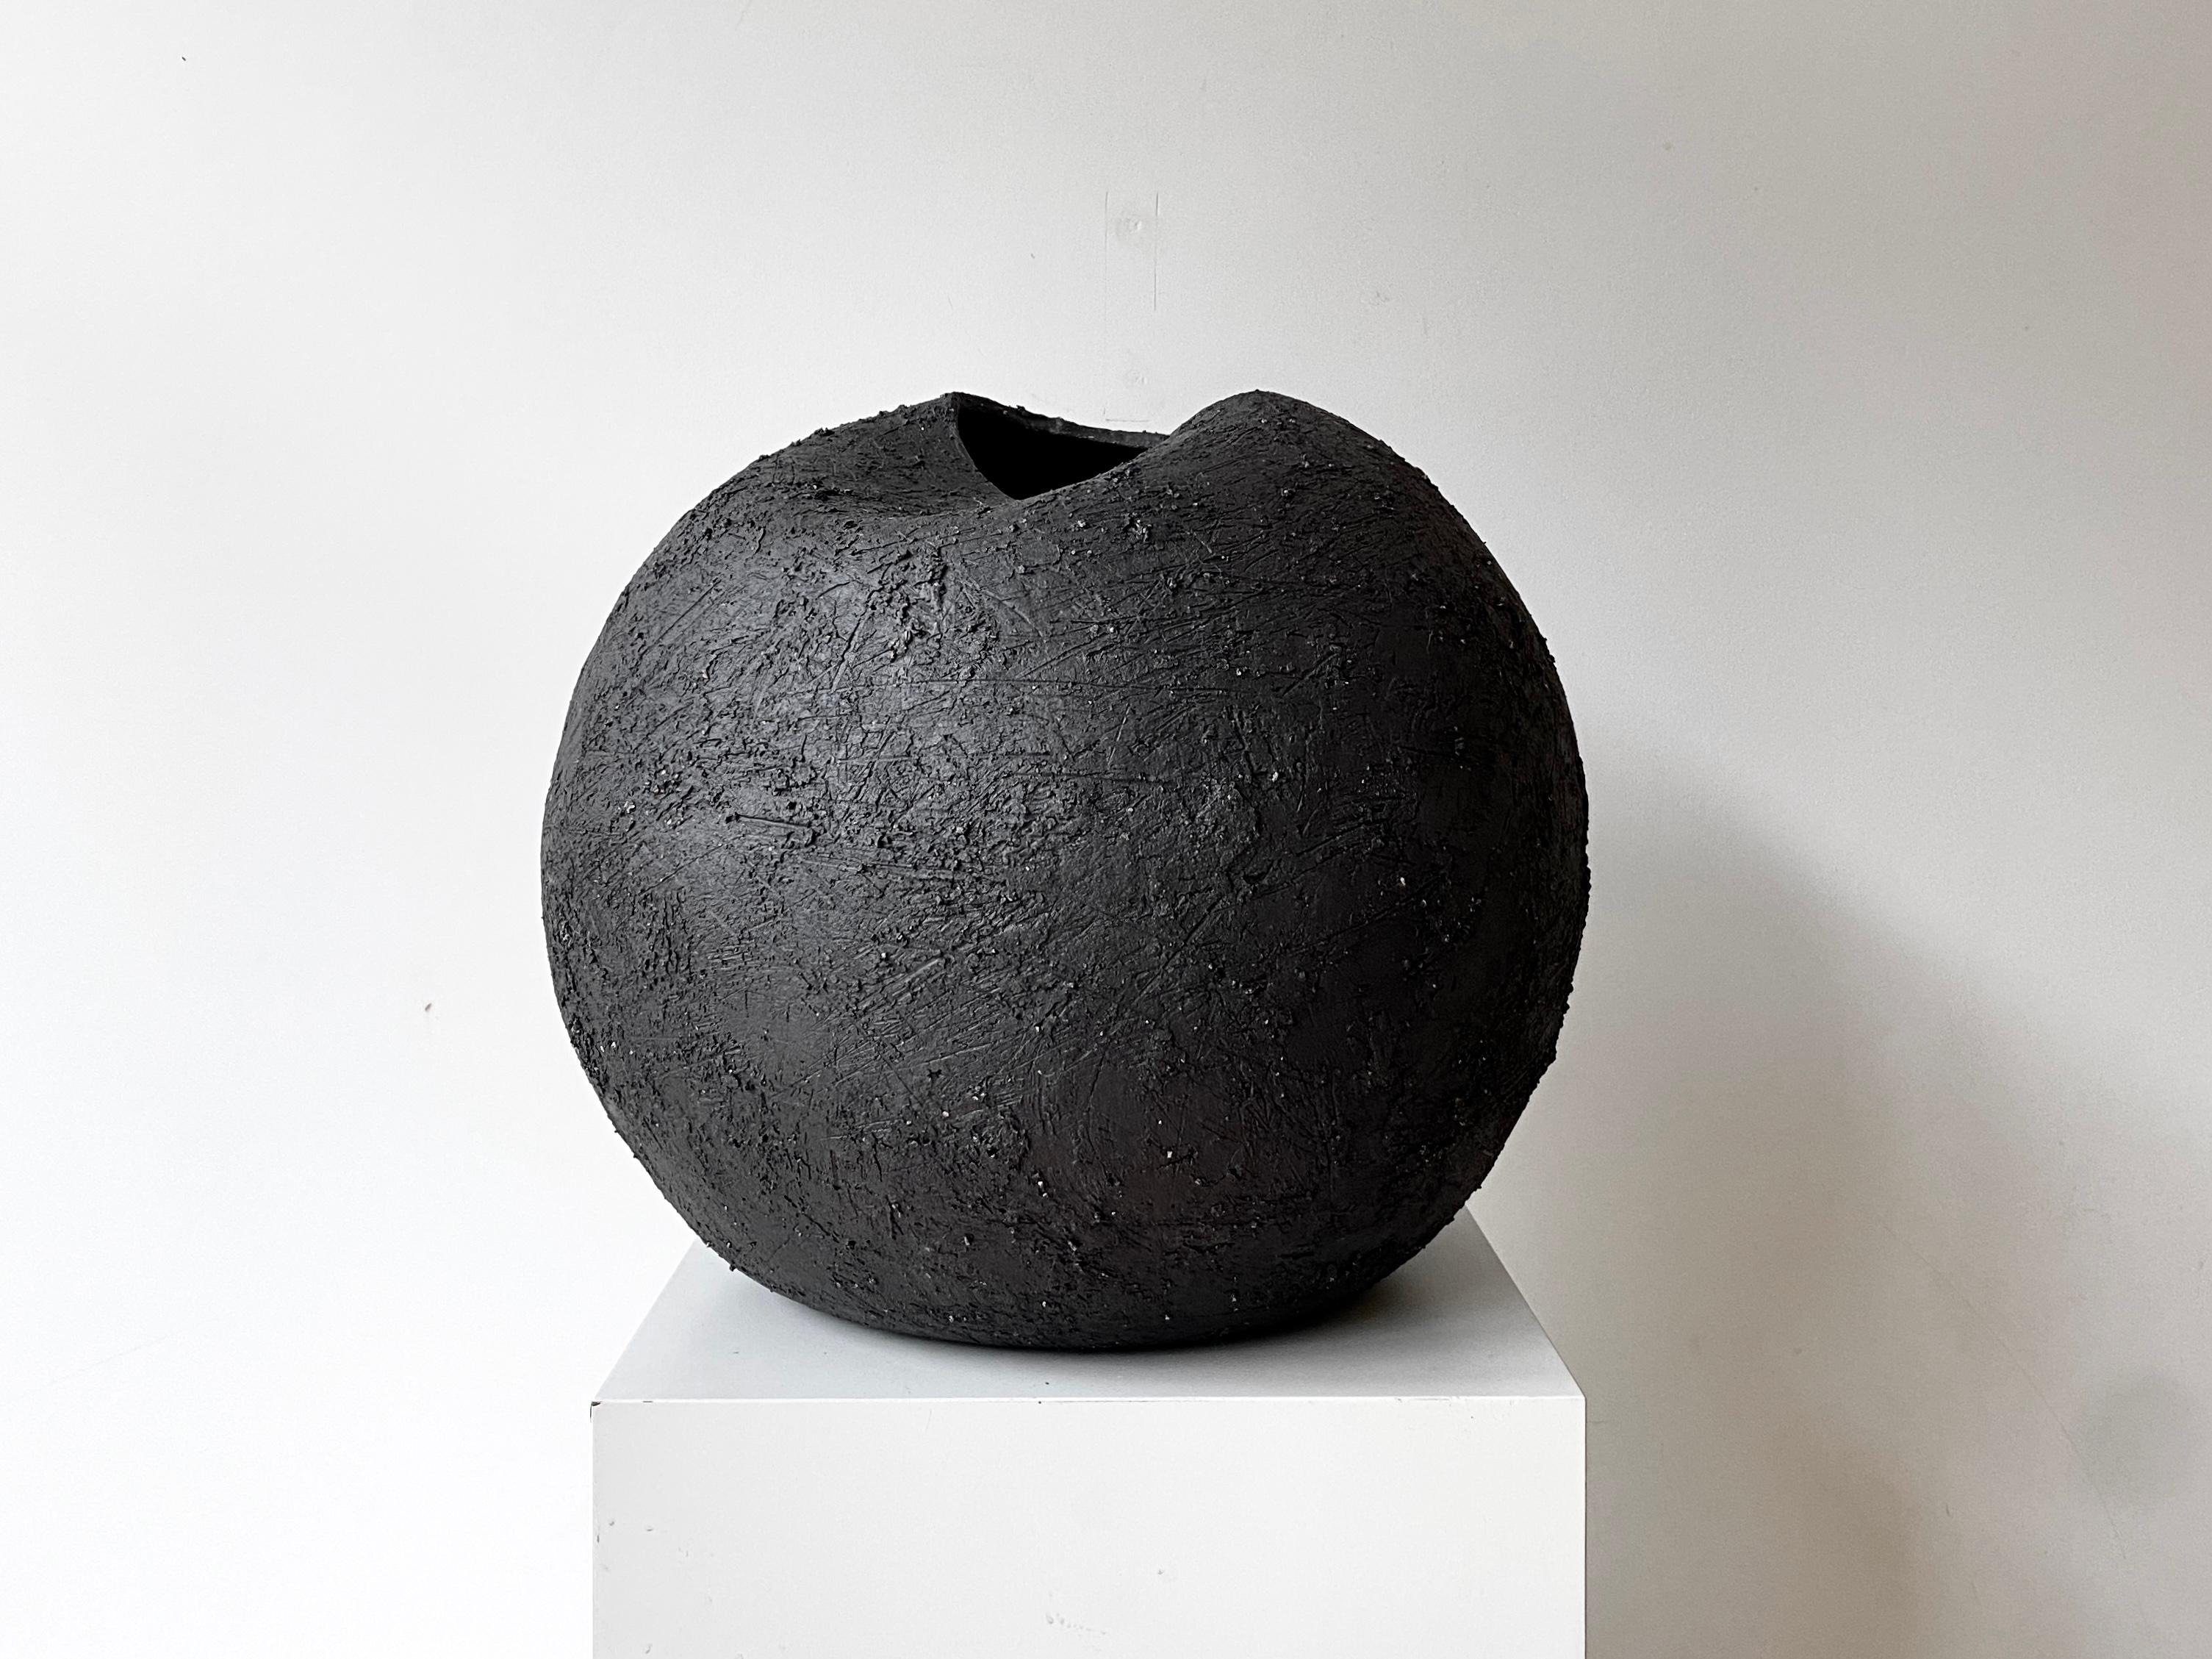 Fold vessel II by Laura Pasquino
One of a kind
Dimensions: Ø 38 x H 36 cm
Materials: stoneware ceramic
Finishing: grogged stoneware

Laura Pasquino
Incorporating references from ancient Korean ceramics as well as principles of Japanese